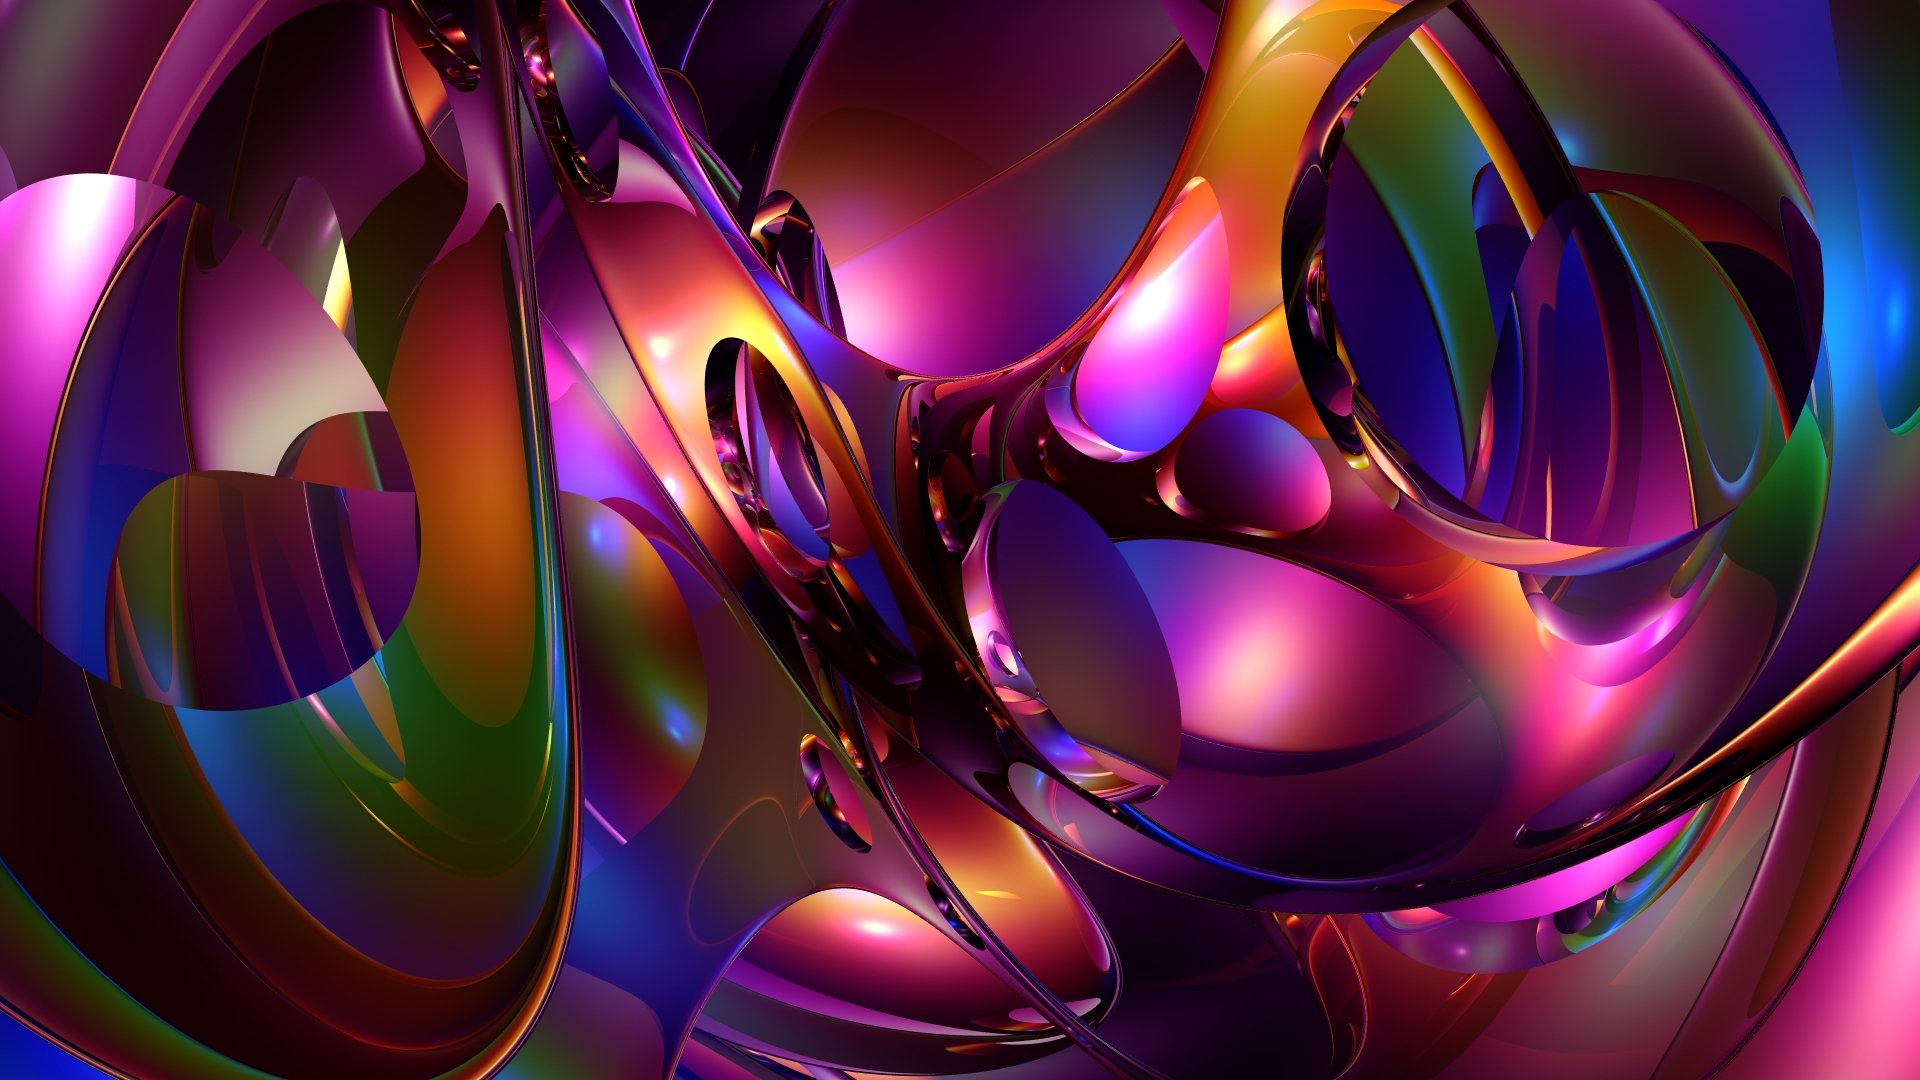 abstract, Art, Colorful, Colors, Design, Illustration, Light, Theme